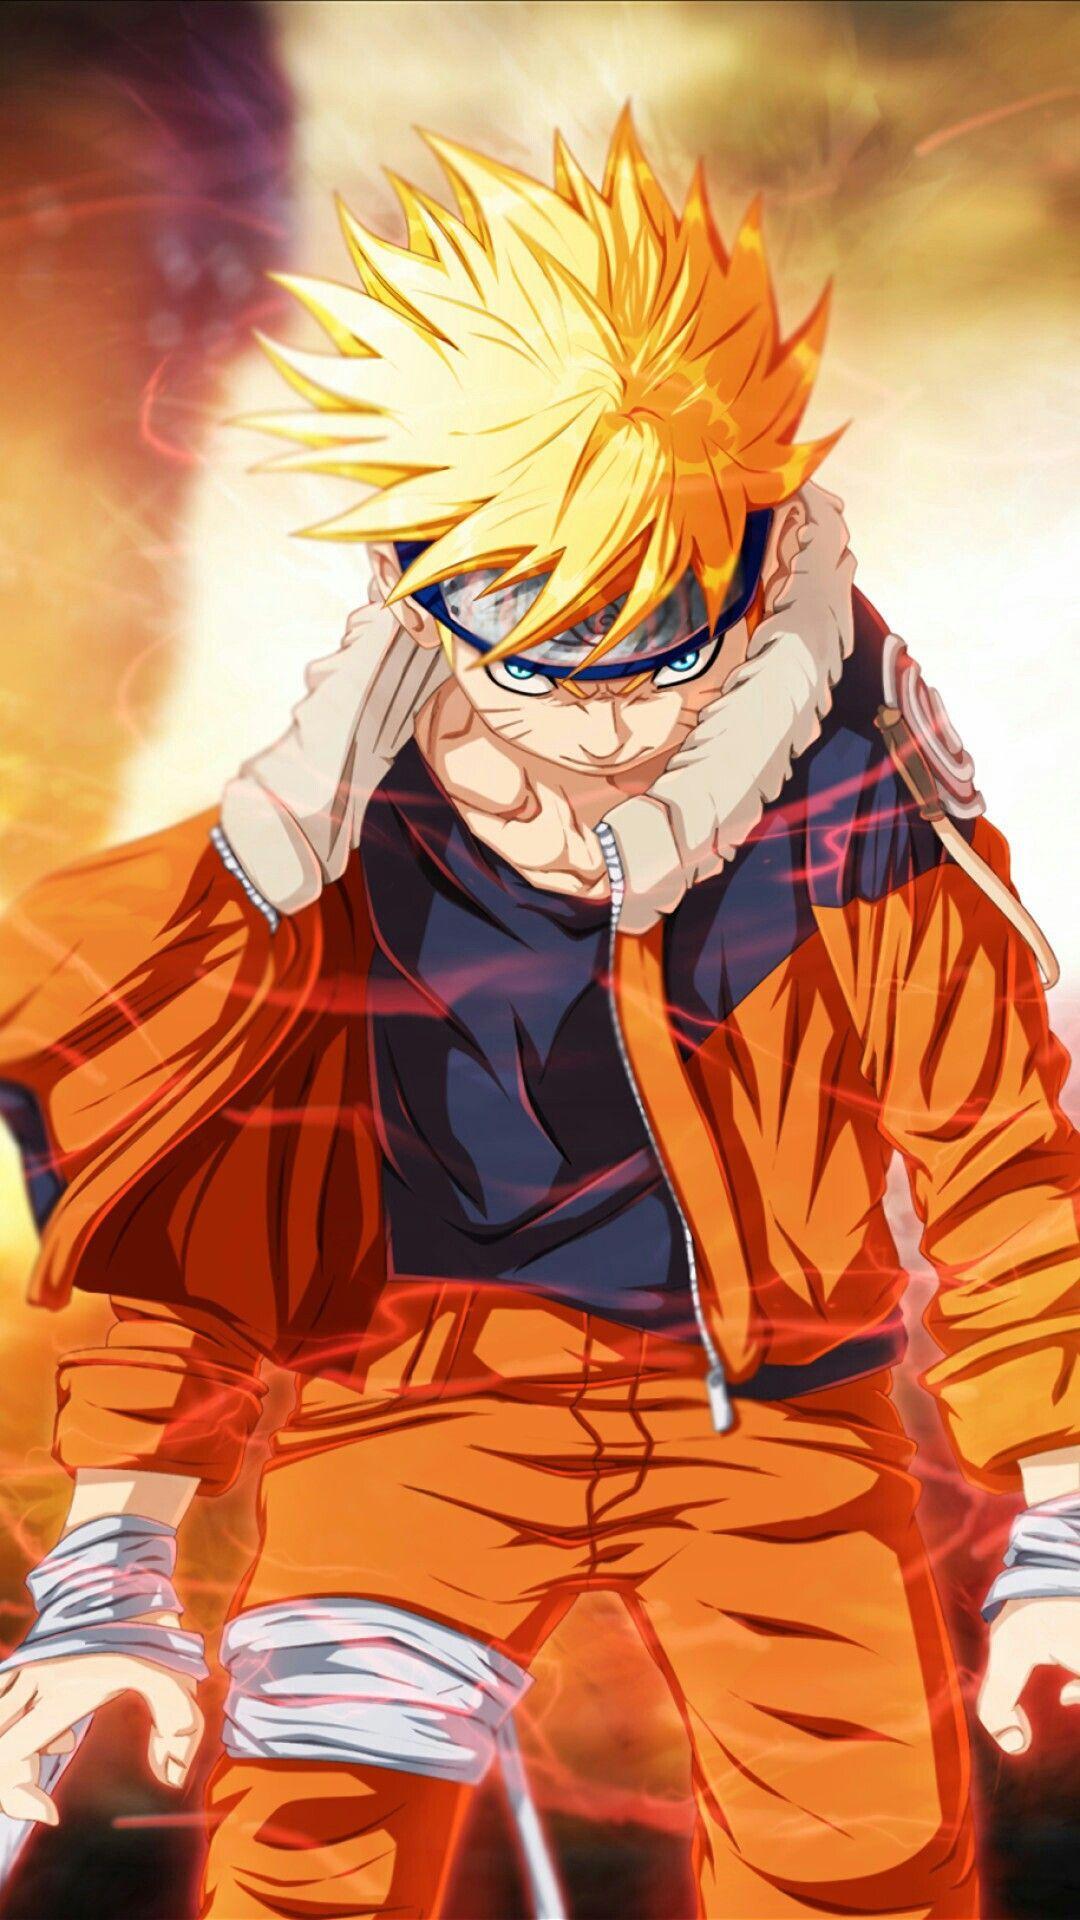 Naruto Fans Wallpapers 2018 for Android - APK Download